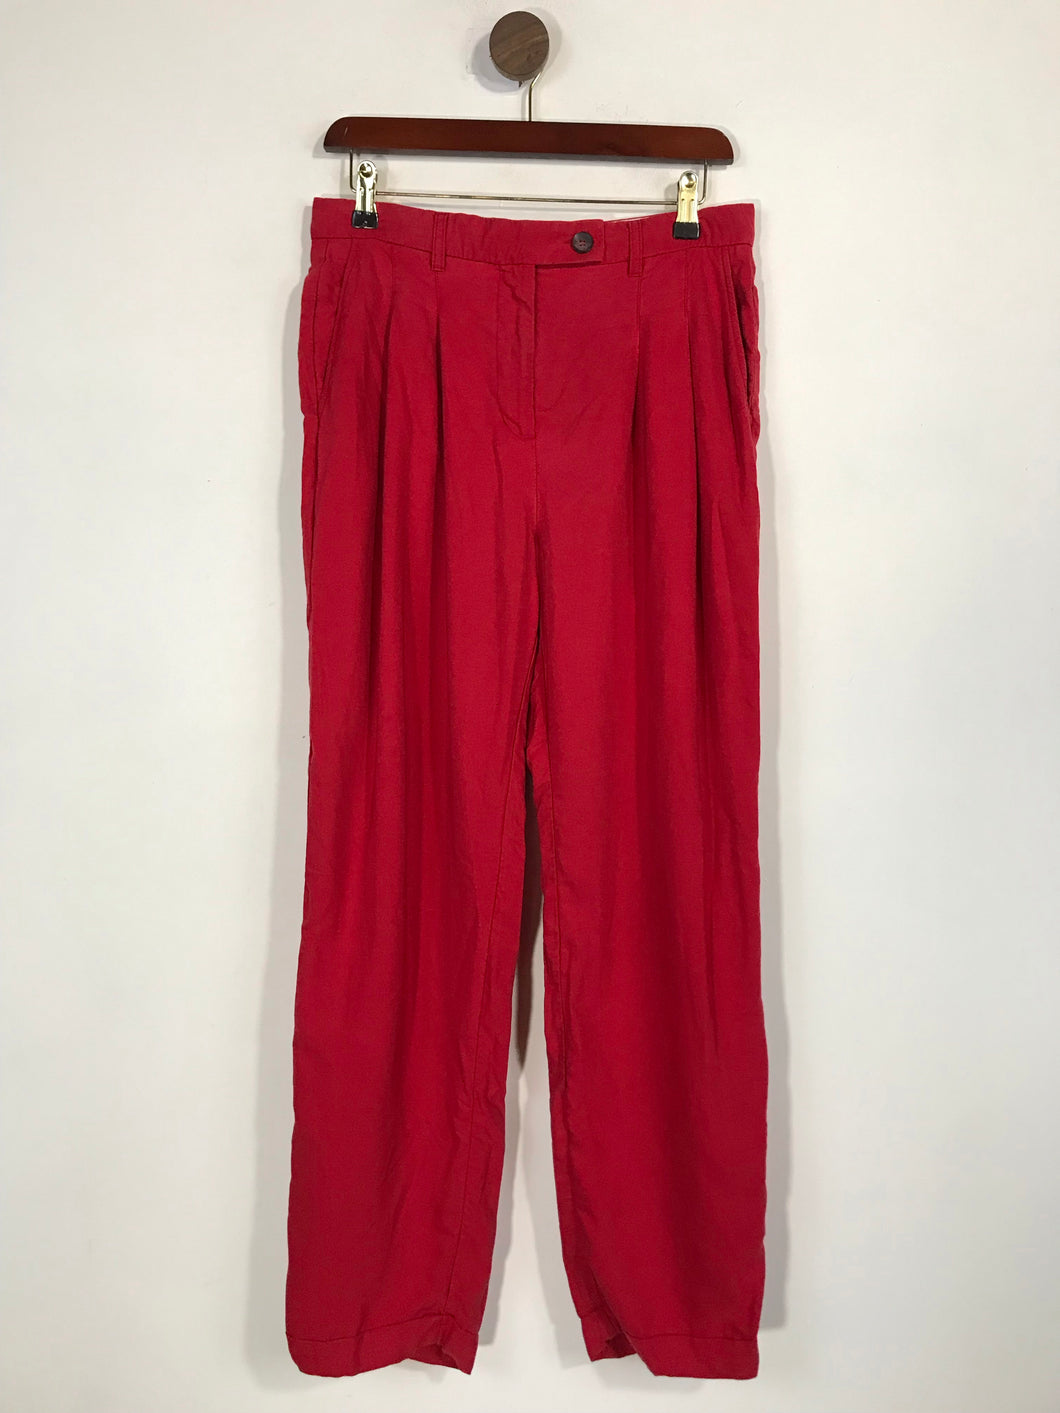 American Vintage Women's Casual Trousers | M UK10-12 | Red